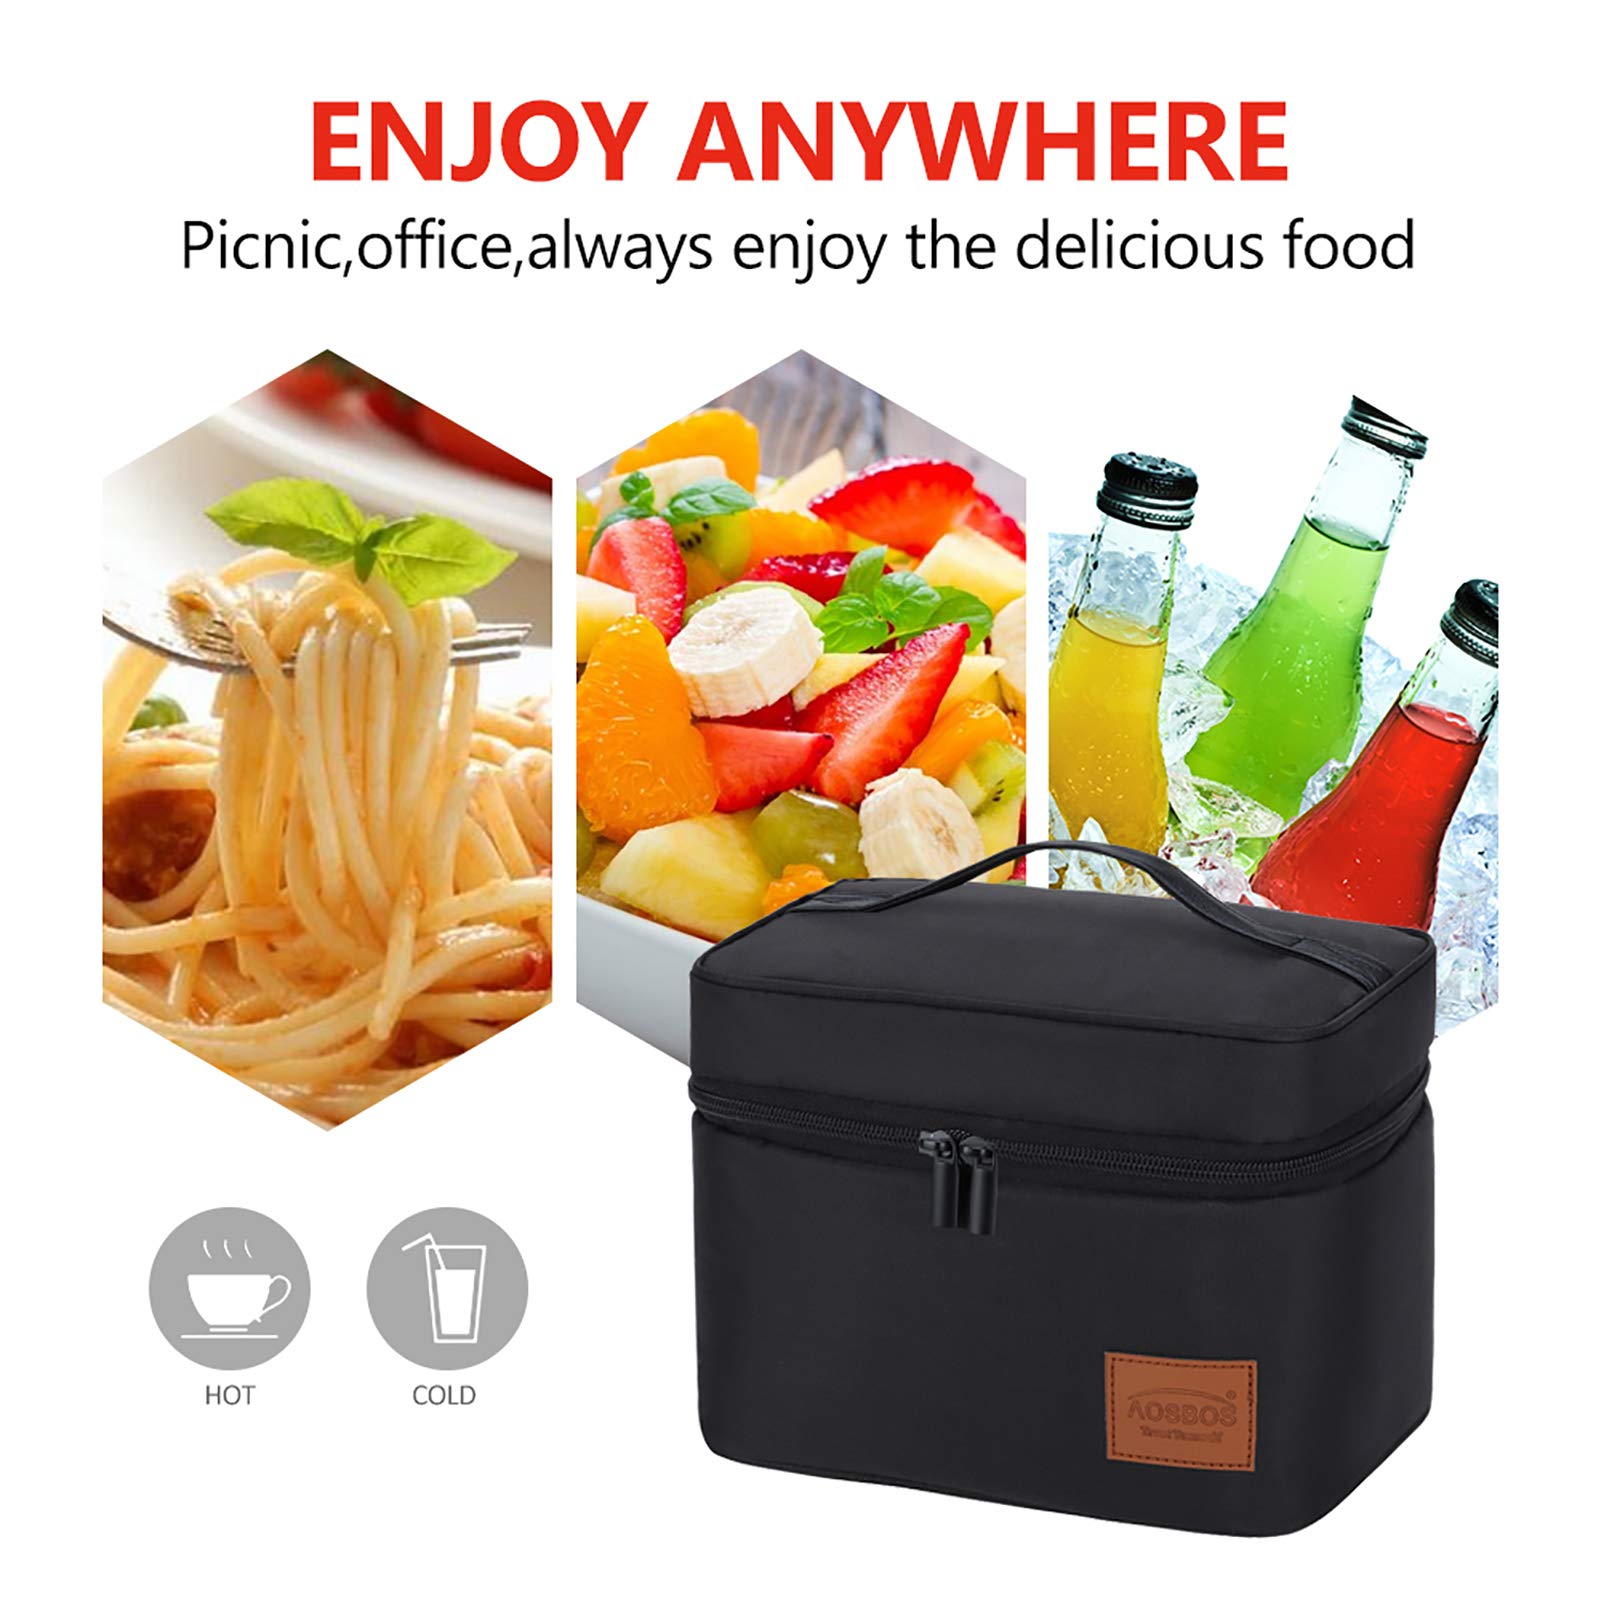 Aosbos Lunch Box Bag for Men Women Insulated Cooler Bags Thermal Bags LunchBag for Food Containers Meal Prep Organizer Adult Lunch Bags for Bento Box Work Office Picnic 7.5L Black